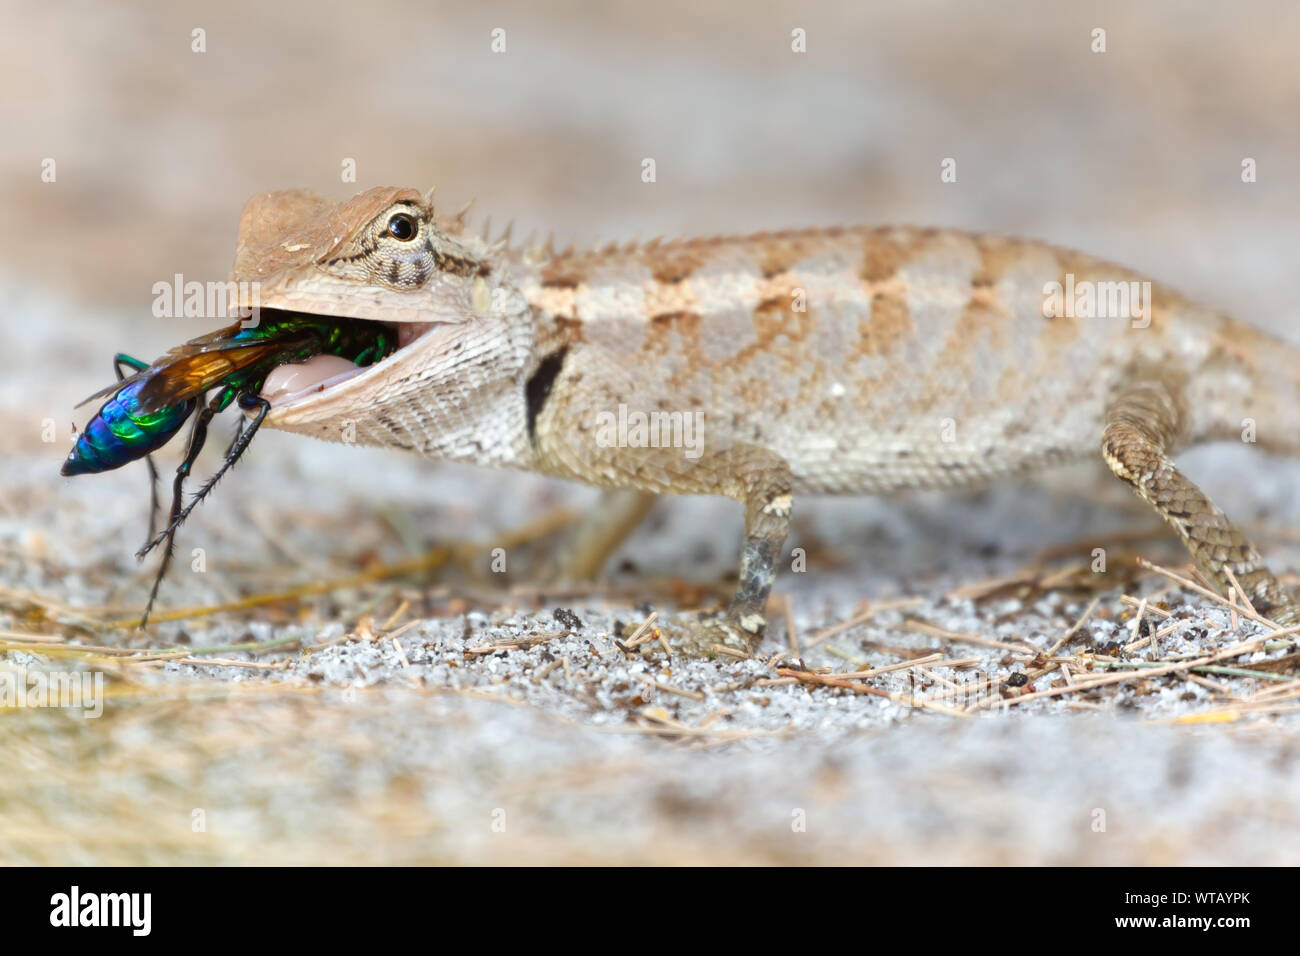 A wild lizard from Agamidae family is eating a colorful wasp on the sand. Thailand Stock Photo